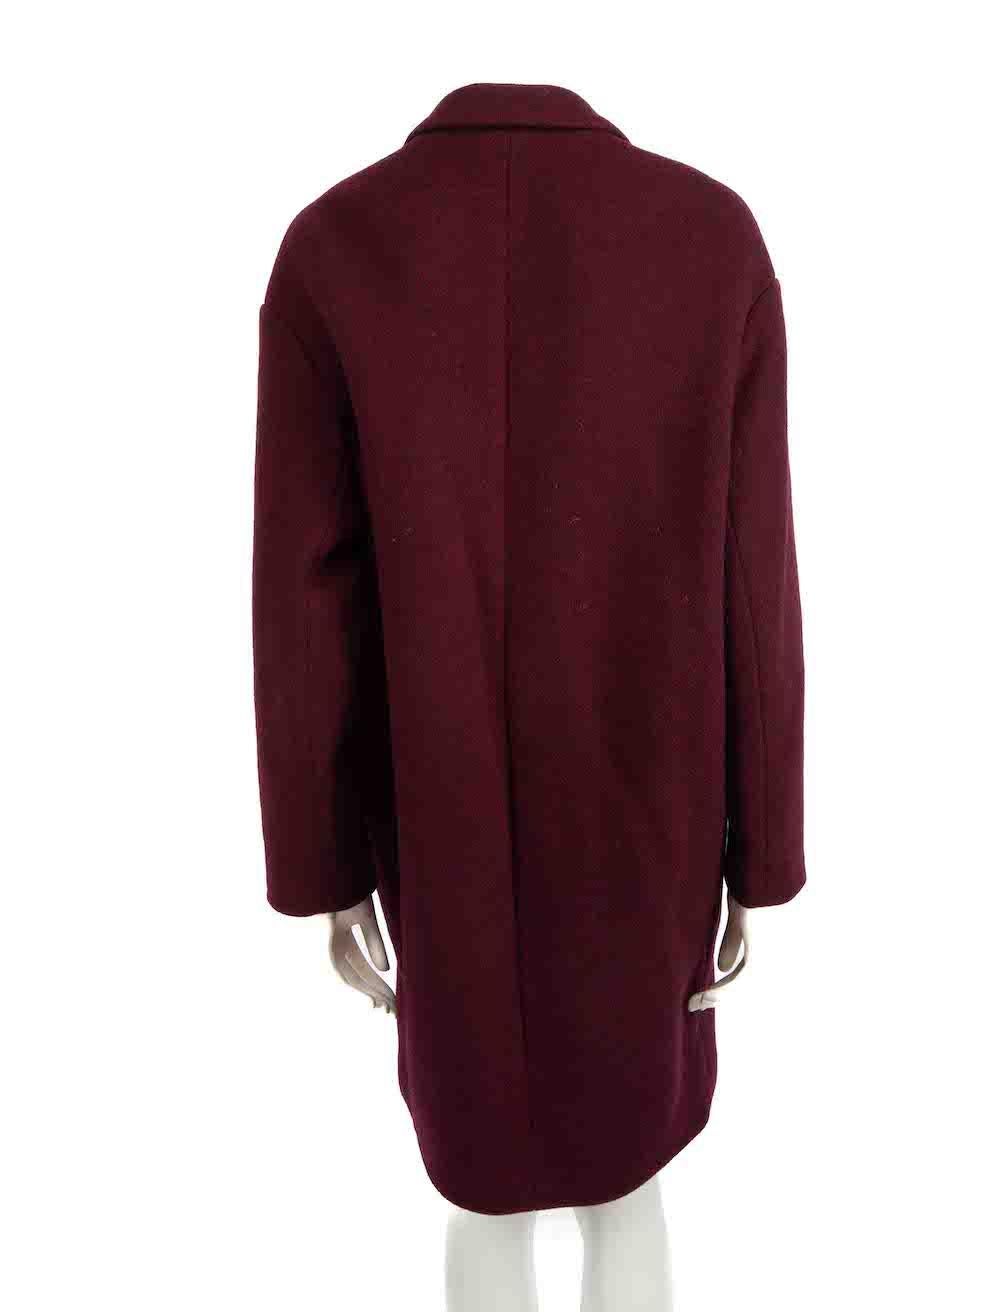 Isabel Marant Burgundy Wool Button-Up Coat Size XS In New Condition For Sale In London, GB